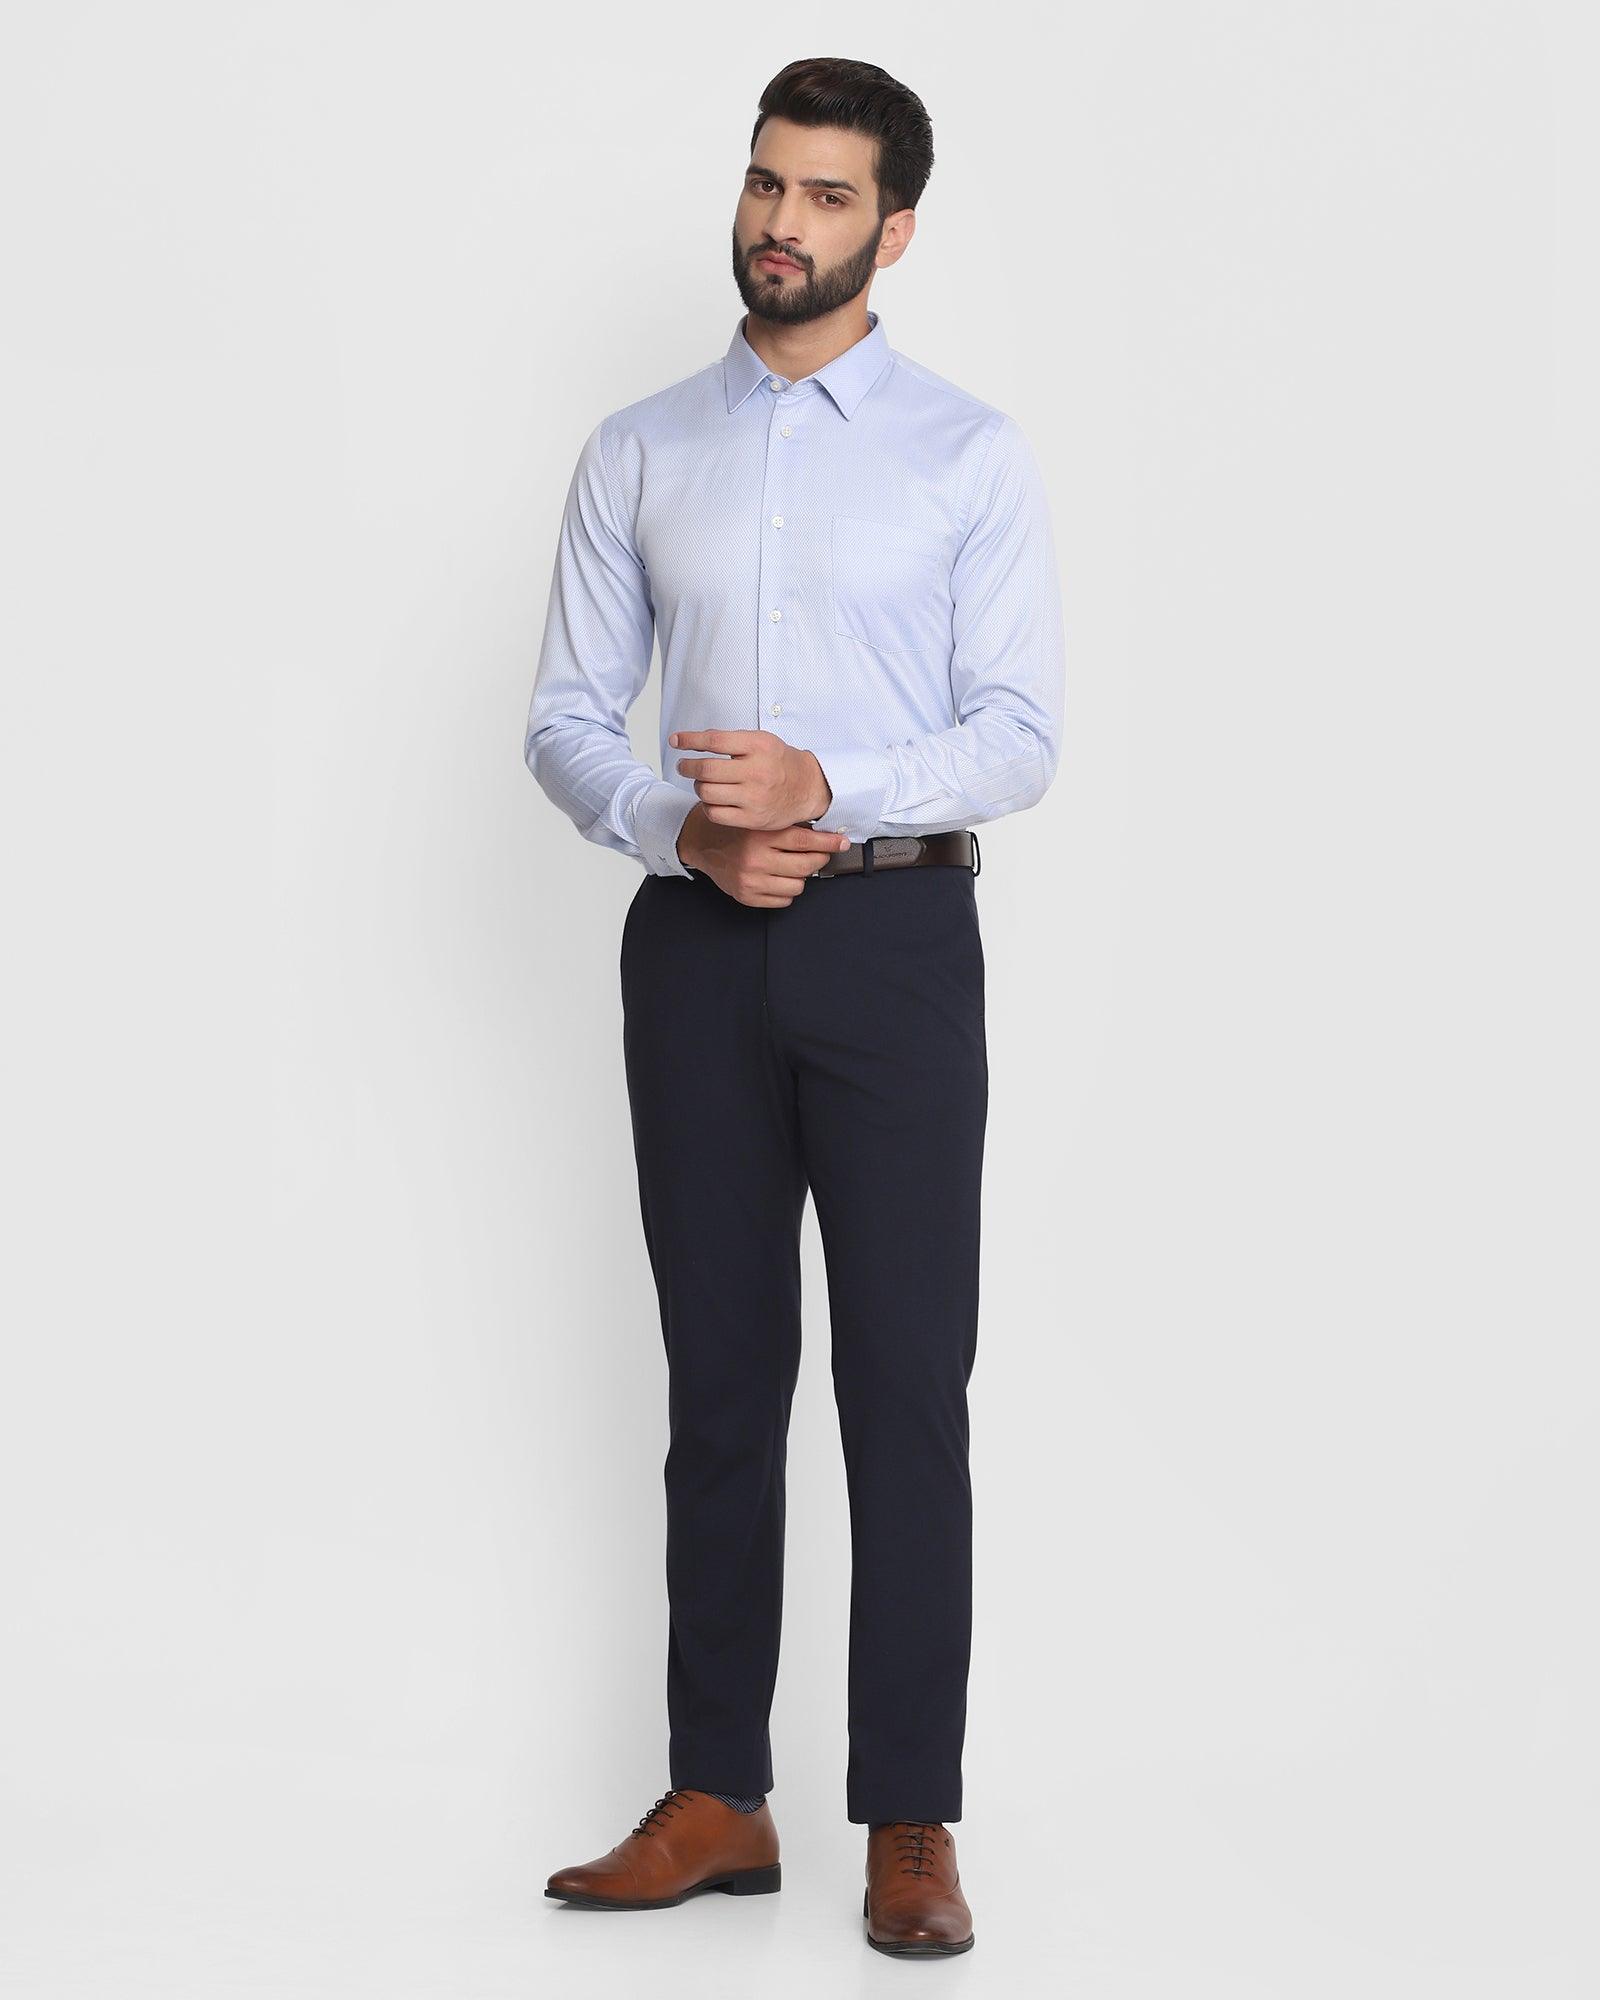 ai generated image of man wearing navy blue shirt with pink trousers -  AvenueSixty